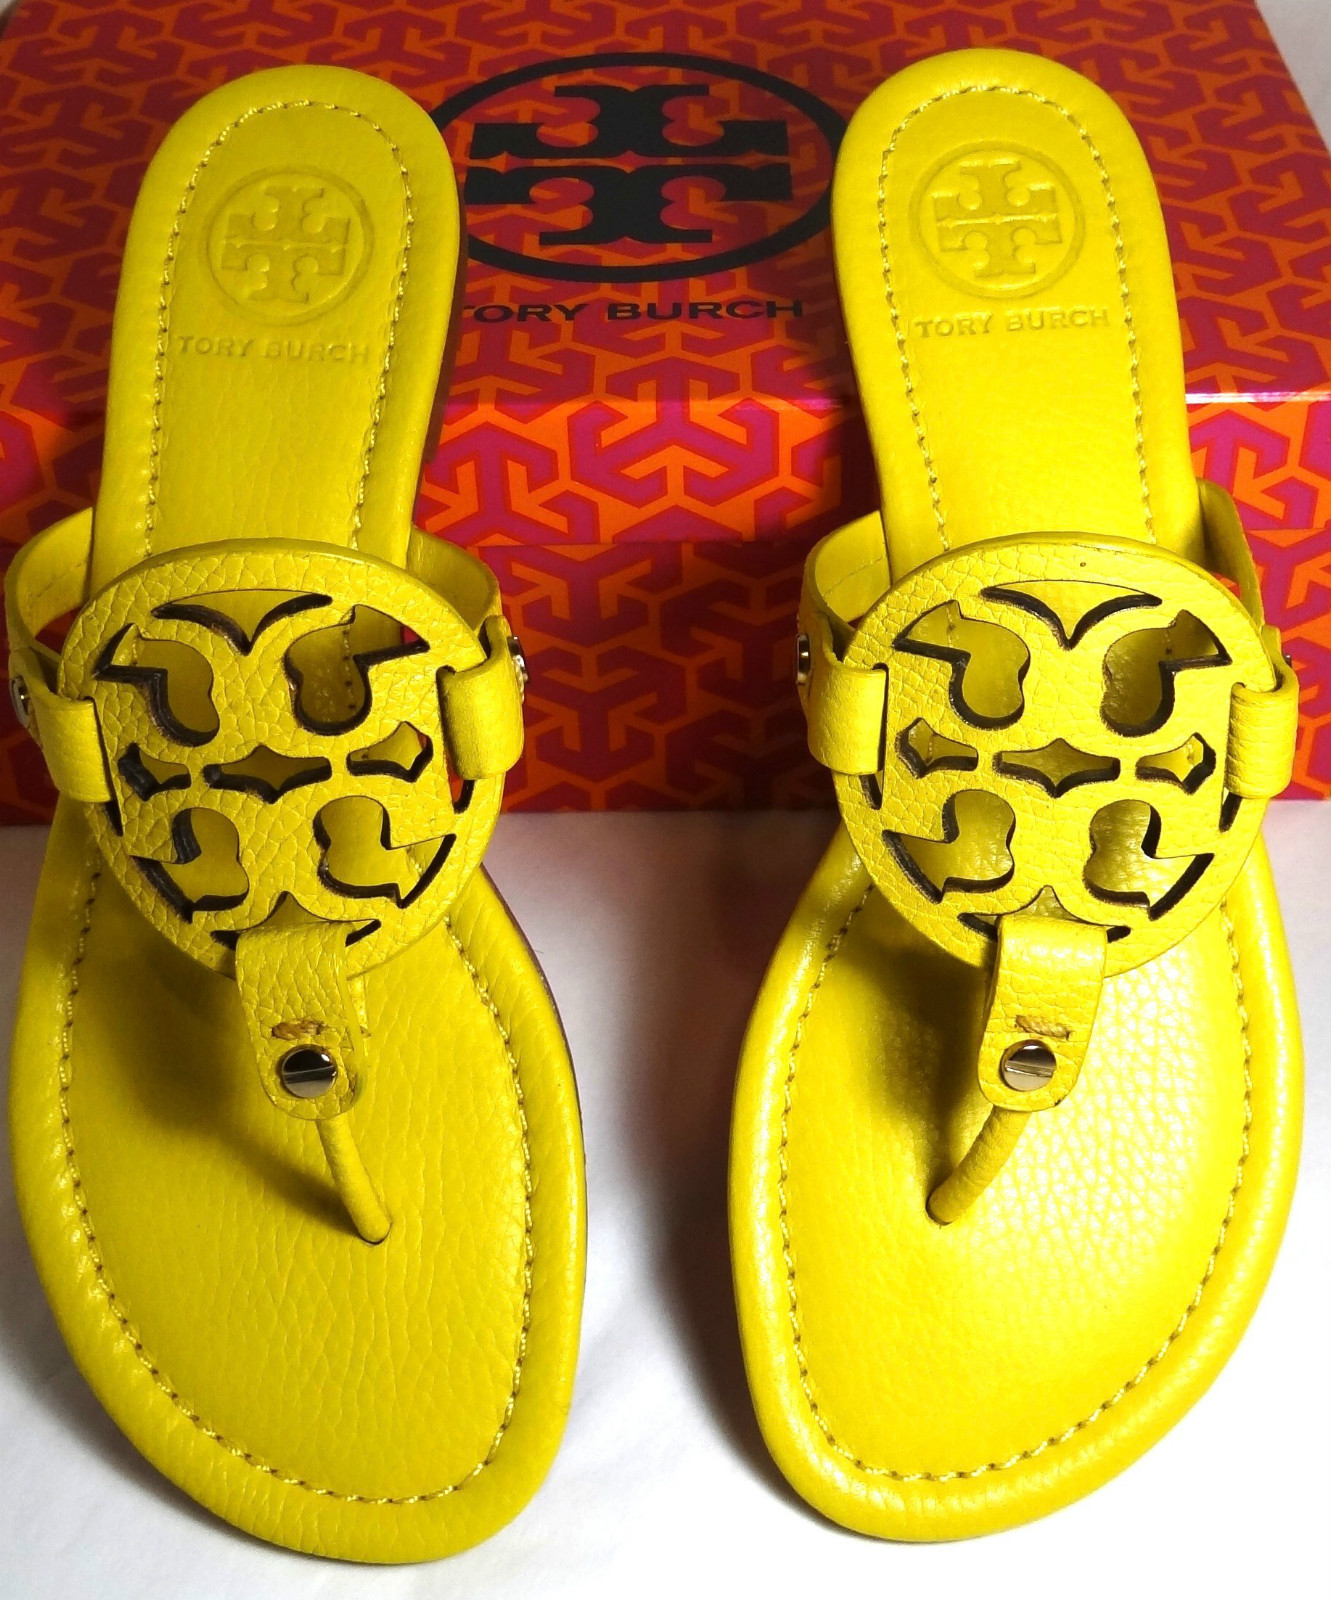 The Chic Sac: Tory Burch Leather Thong Sandals - 5 colors!